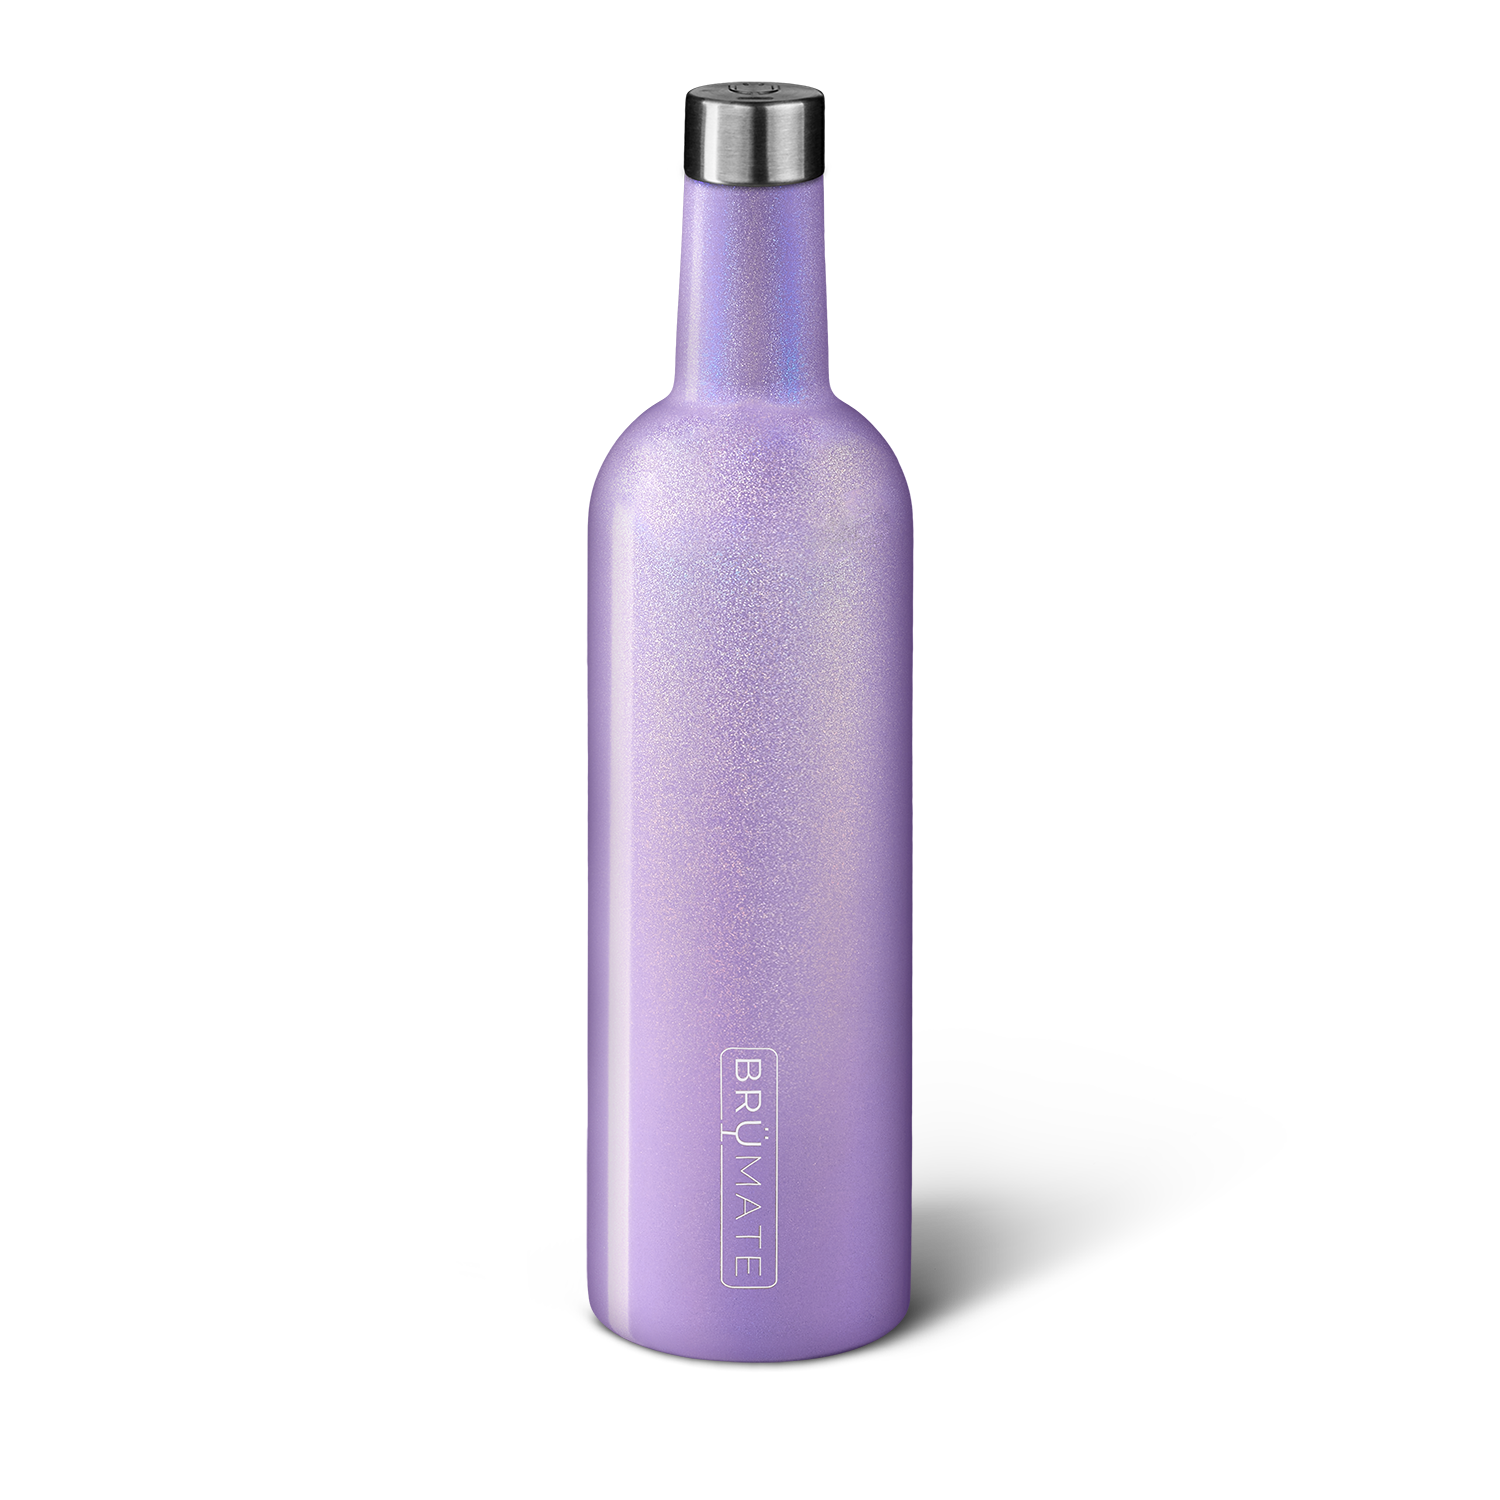 https://cdn.shopify.com/s/files/1/1114/2308/products/winesulator-glitter-violet.png?v=1660191432